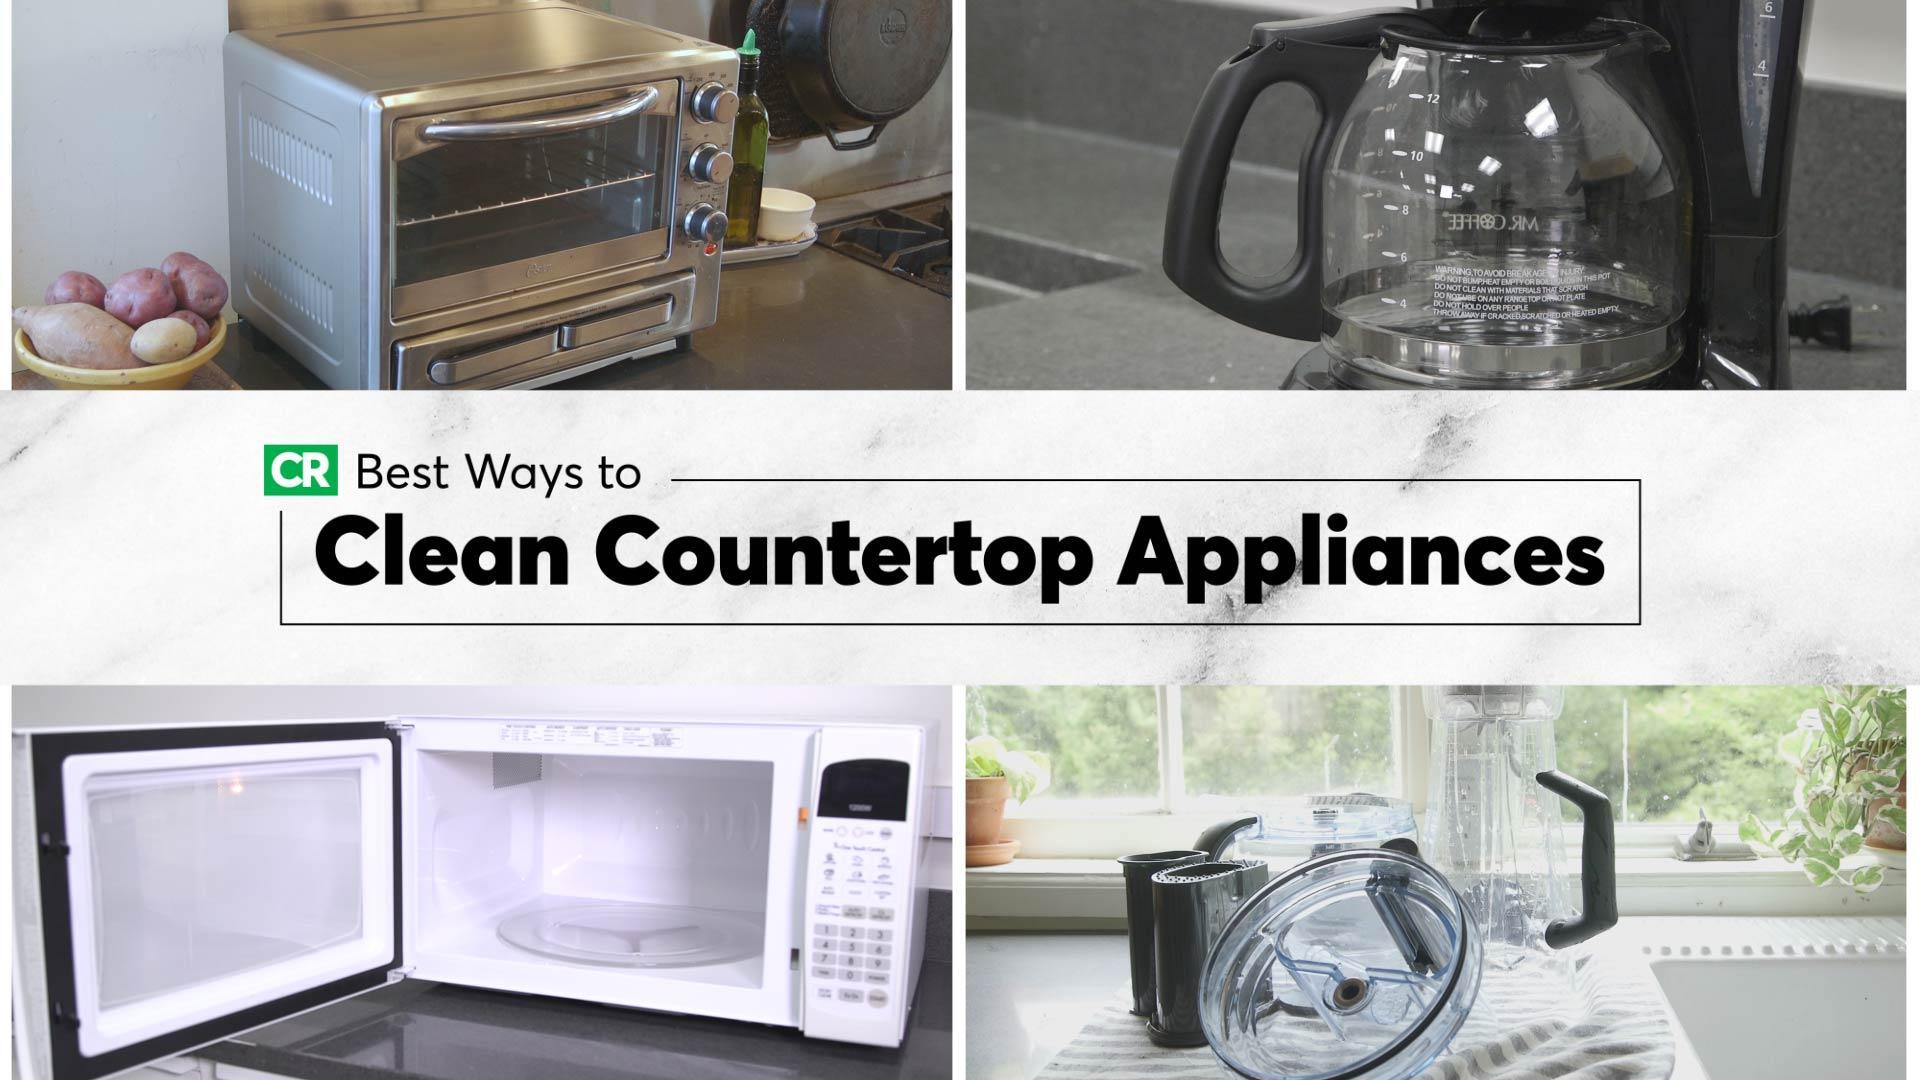 How to Clean Your Small Appliances - Consumer Reports